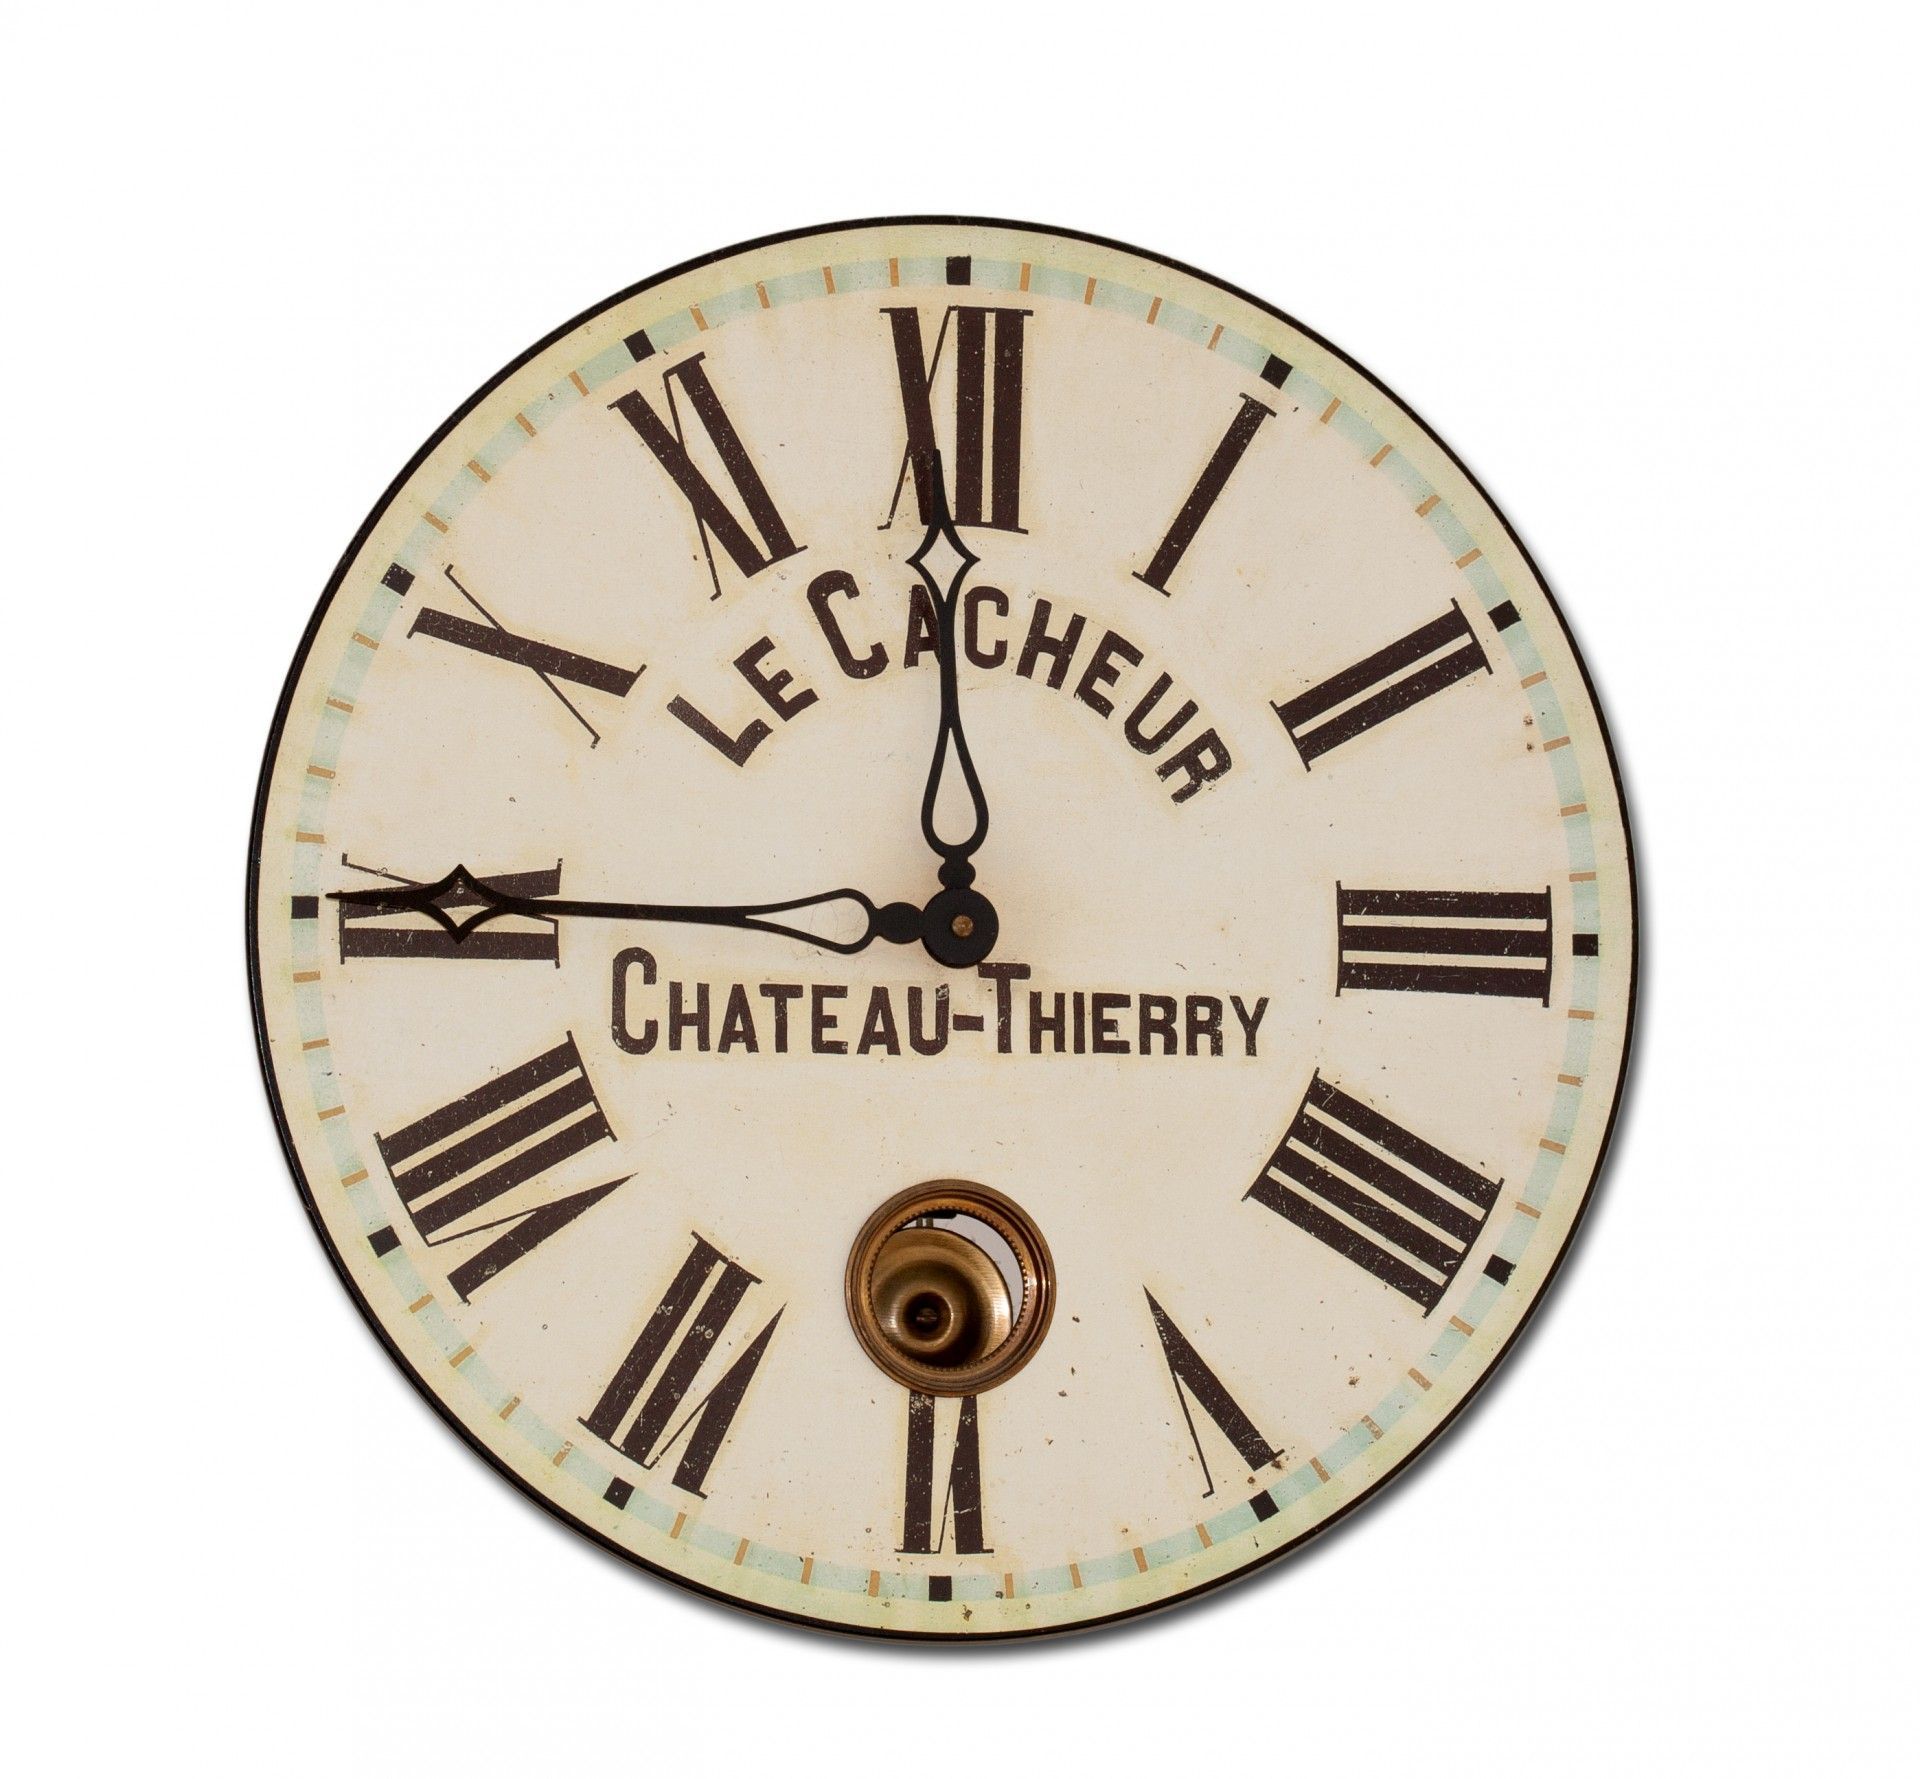 vintage french wall clock wallpaper download full free high resolution. French wall clock, Clock wallpaper, French walls